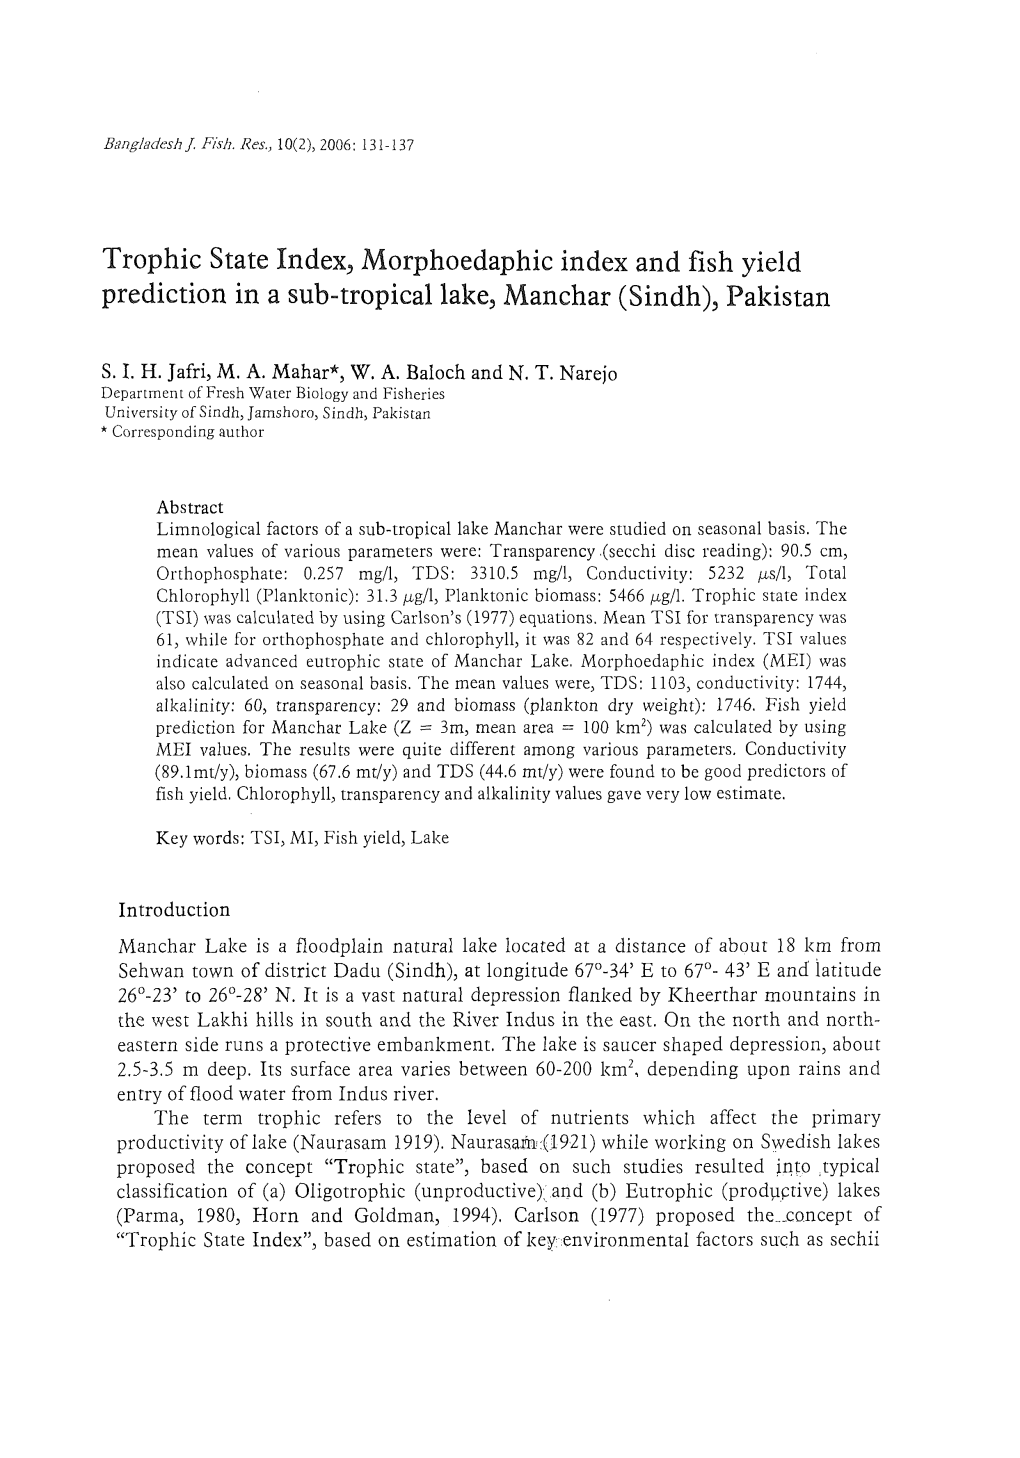 Trophic State Index, Morphoedaphic Index and Fish Yield Prediction in a Sub-Tropical Lake, Manchar (Sindh), Pakistan